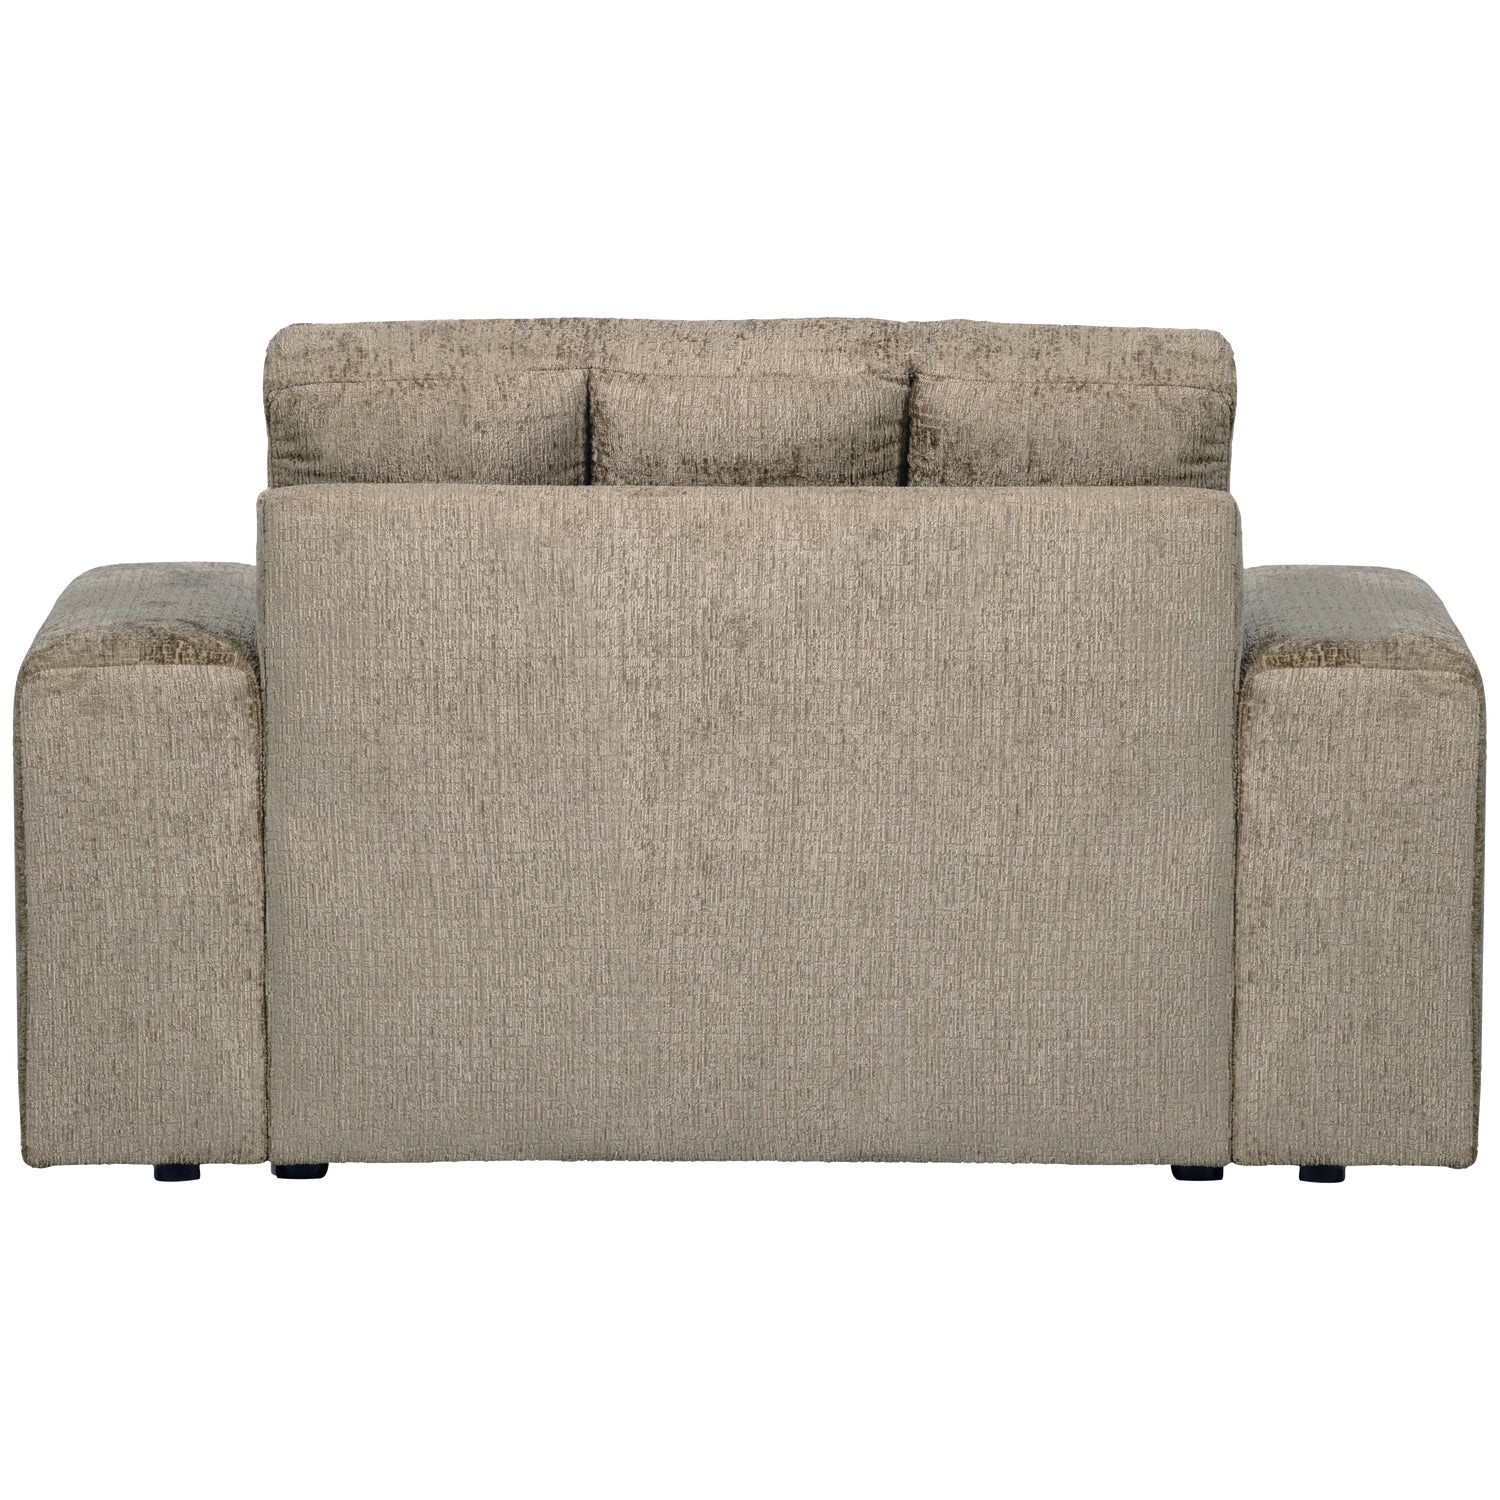 379006-WH-02_VS_WE_second_date_loveseat_structure_velvet_wheatfield_AK1.png?auto=webp&format=png&width=1500&height=1500